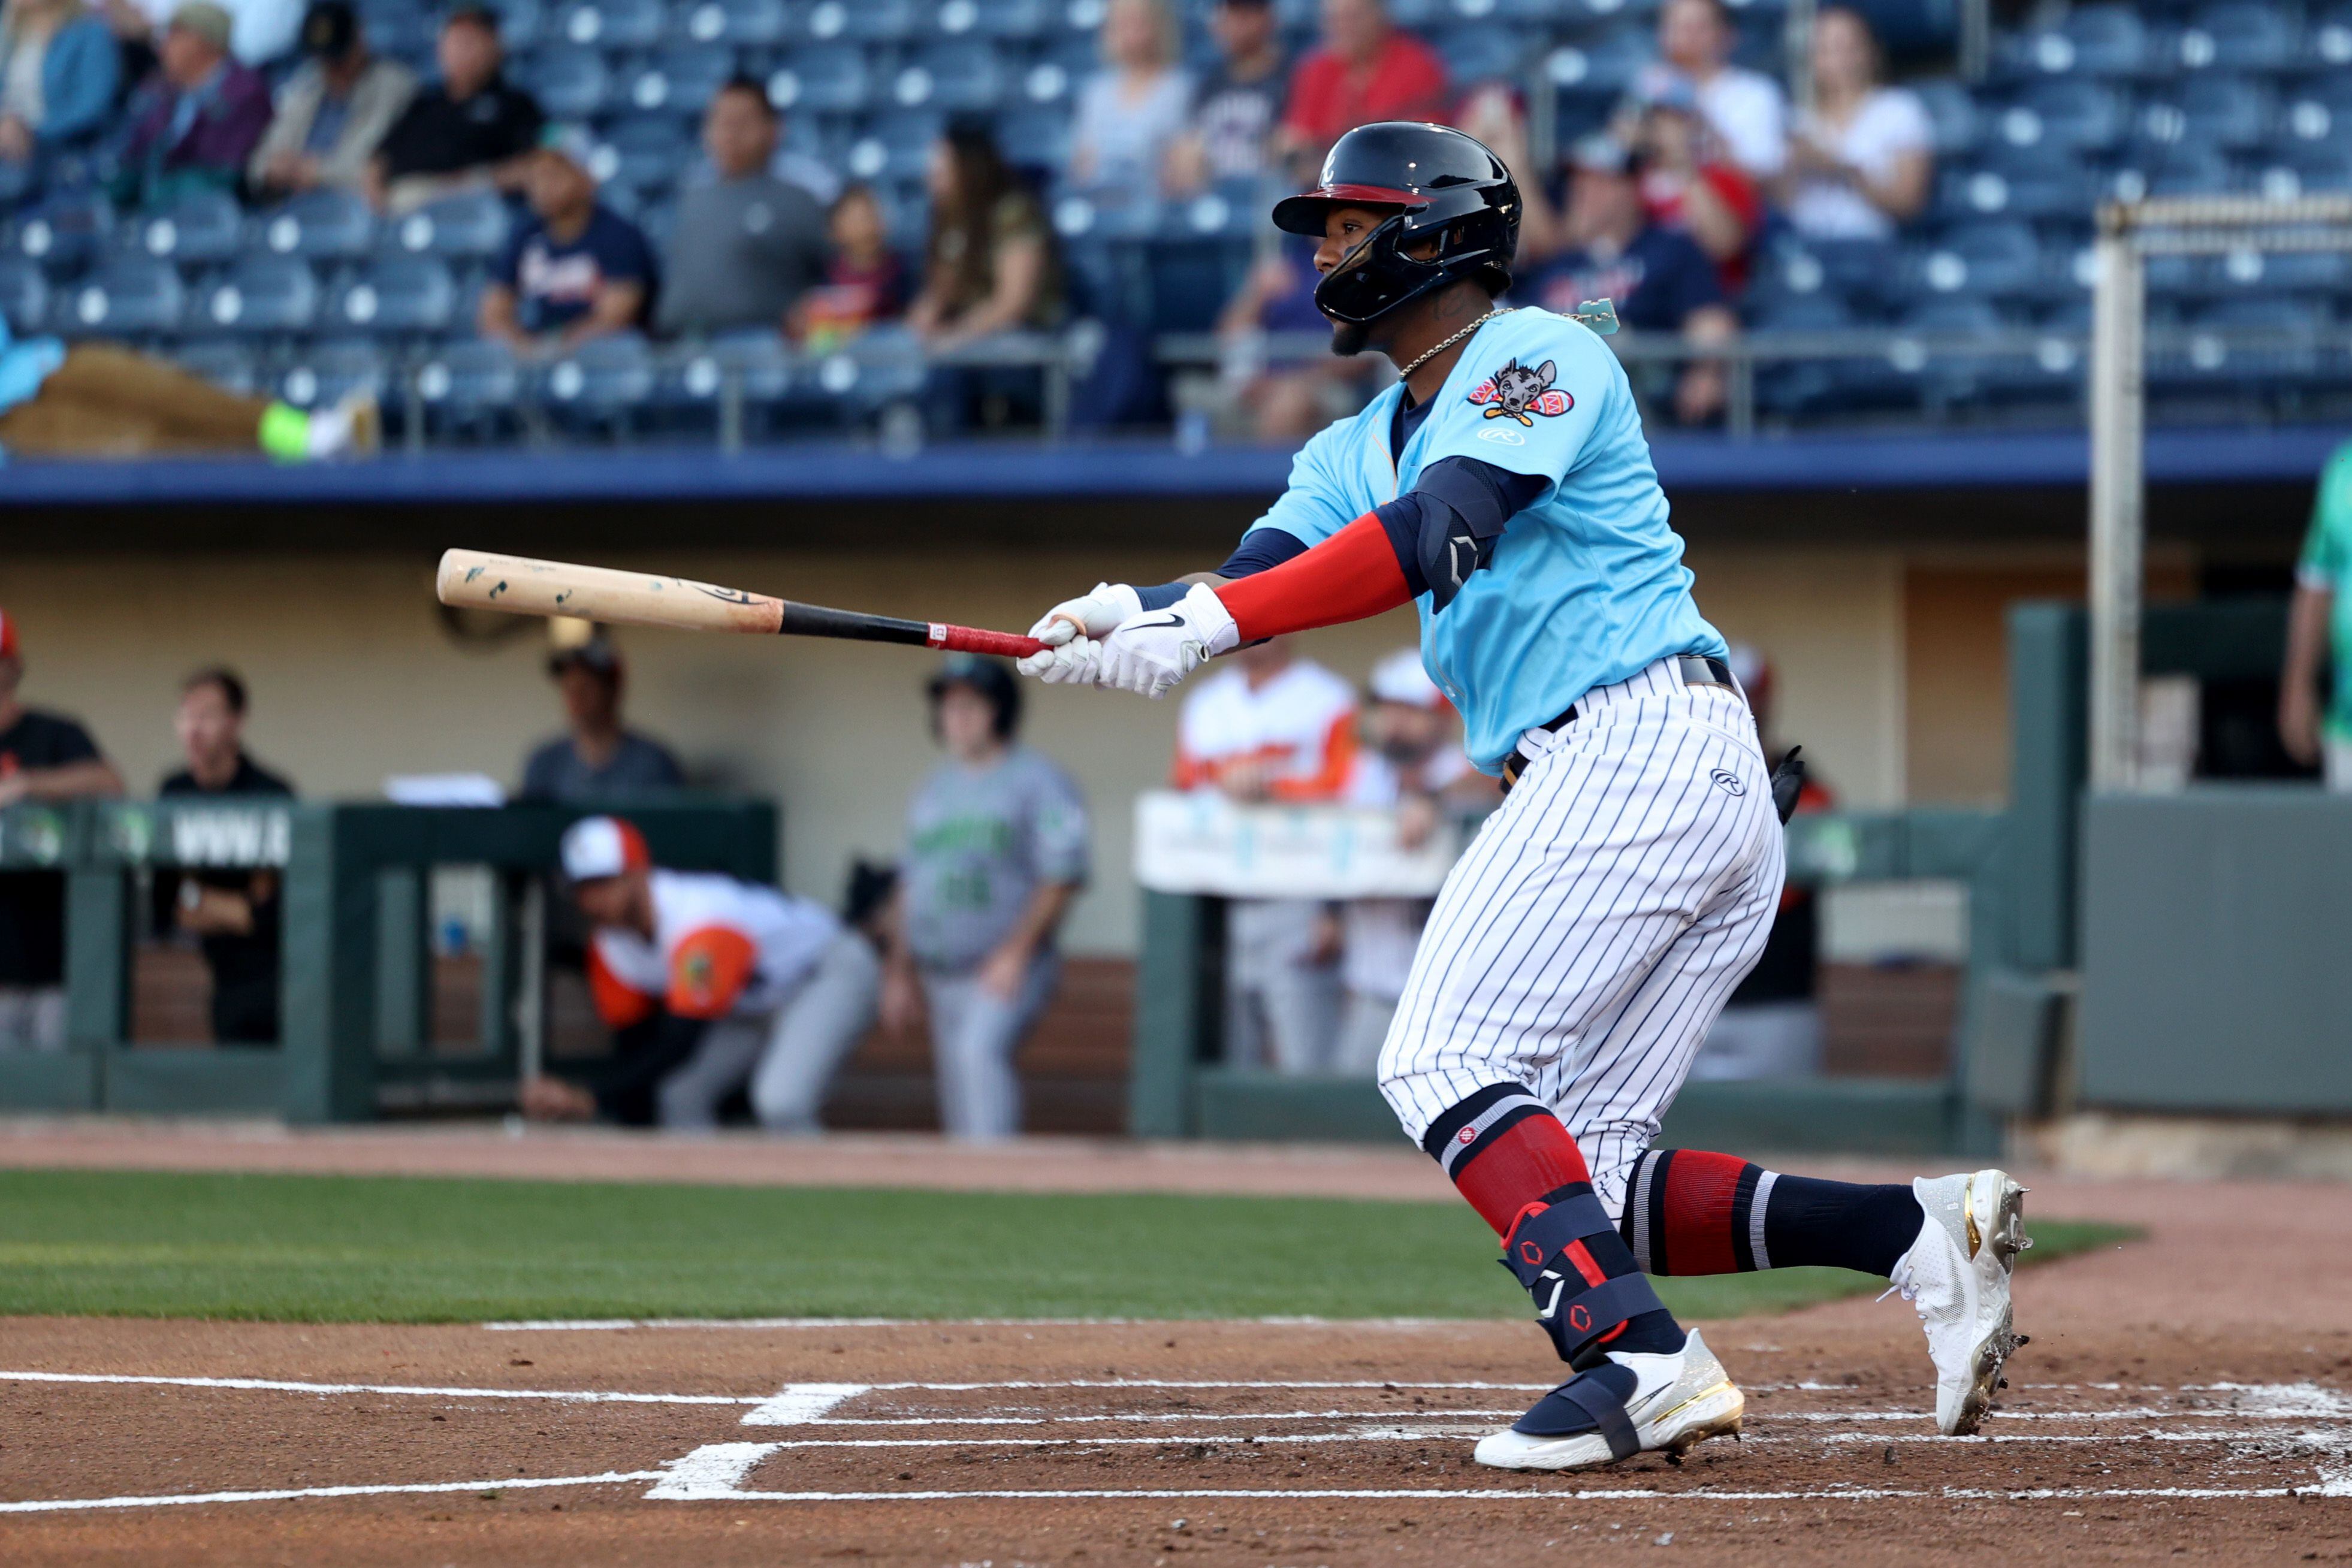 Braves star Ronald Acuña officially joins Gwinnett Stripers for rehab stint, Sports